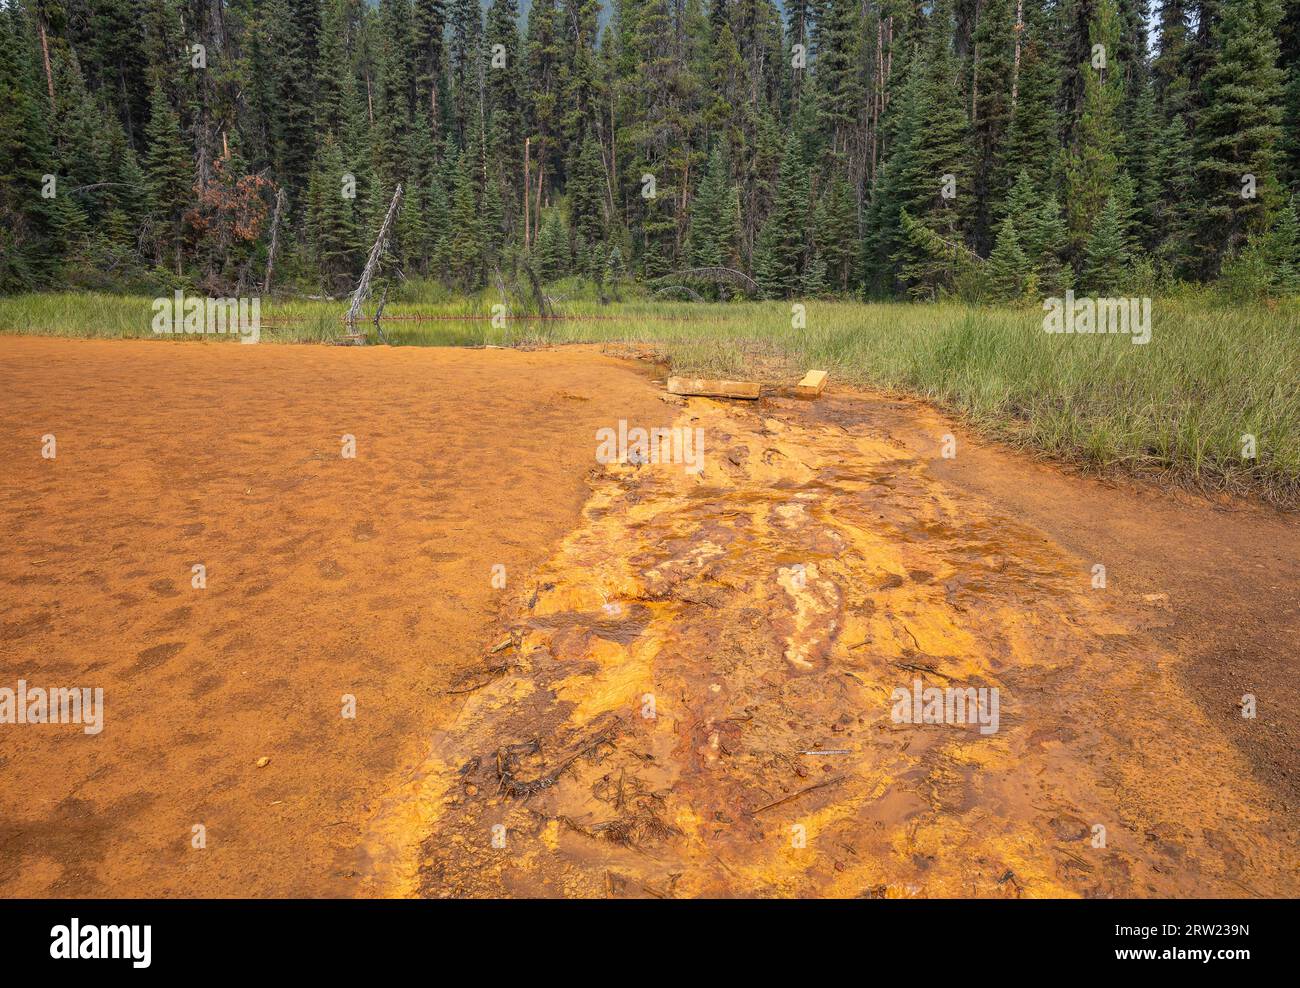 The site of an abandoned ochre mine resulting in stained ground in Kootenay National Park, British Columbia, Canada Stock Photo